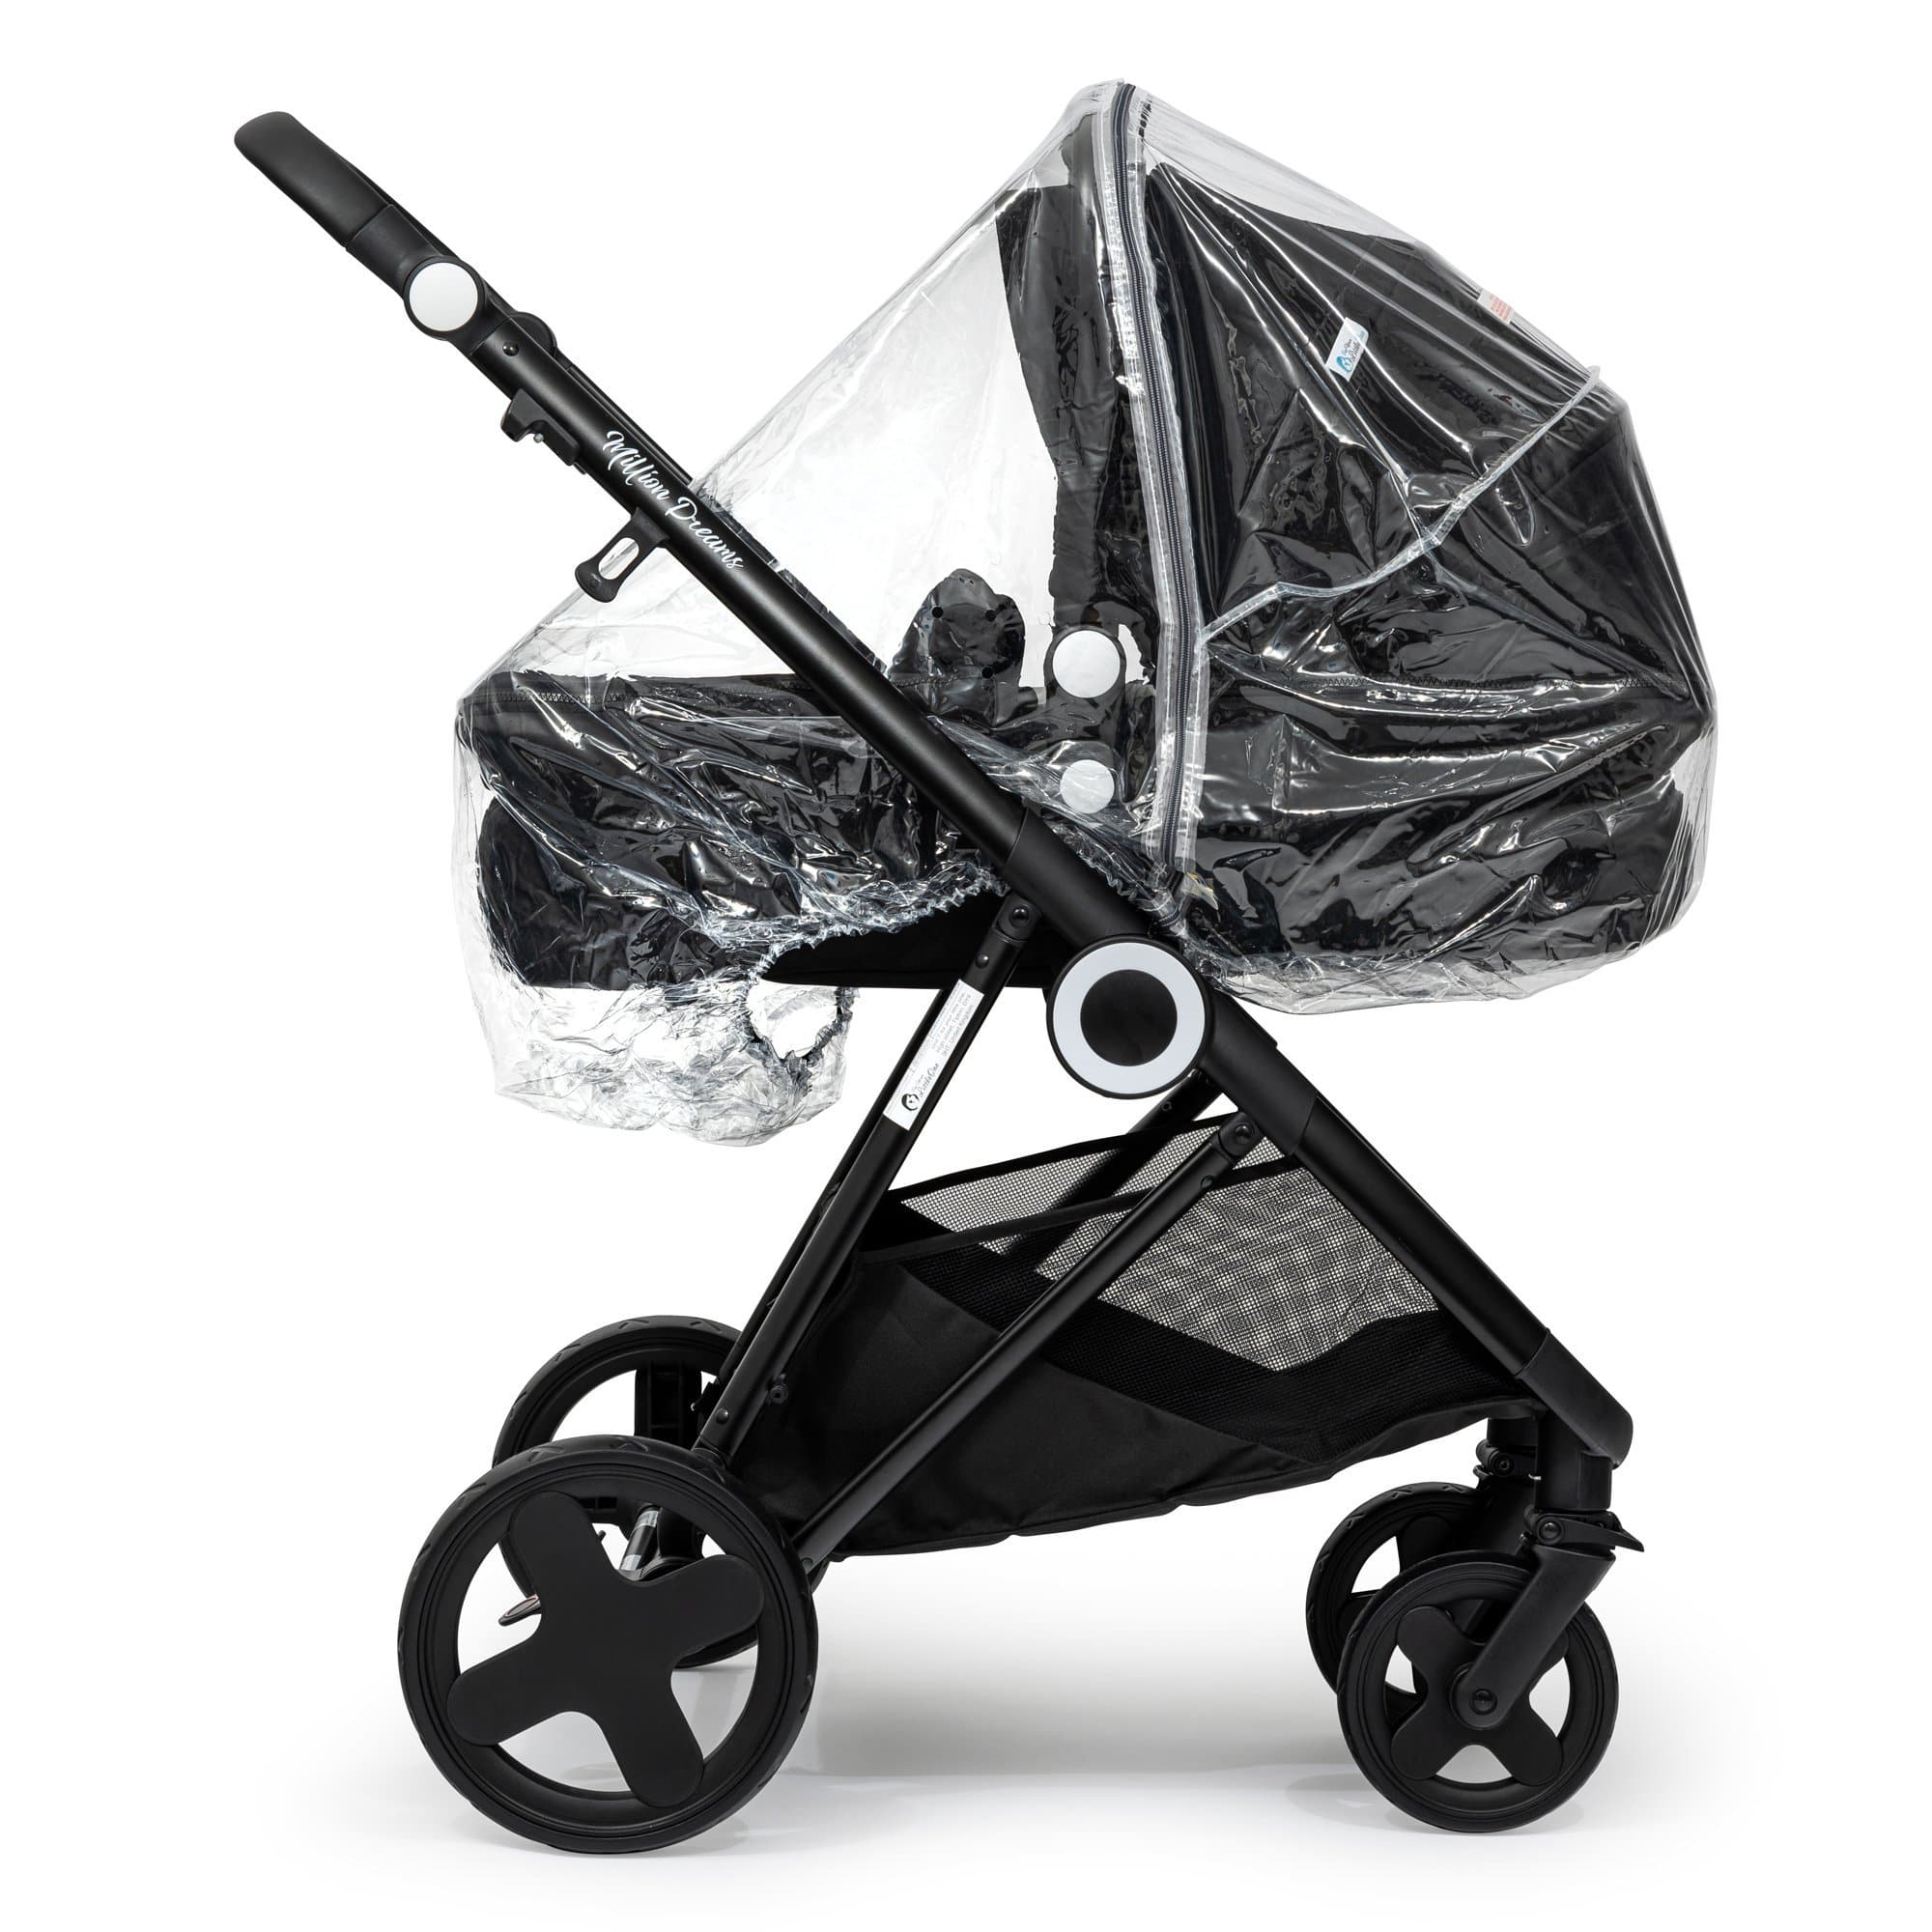 2 in 1 Rain Cover Compatible with Kiddicare - Fits All Models - For Your Little One